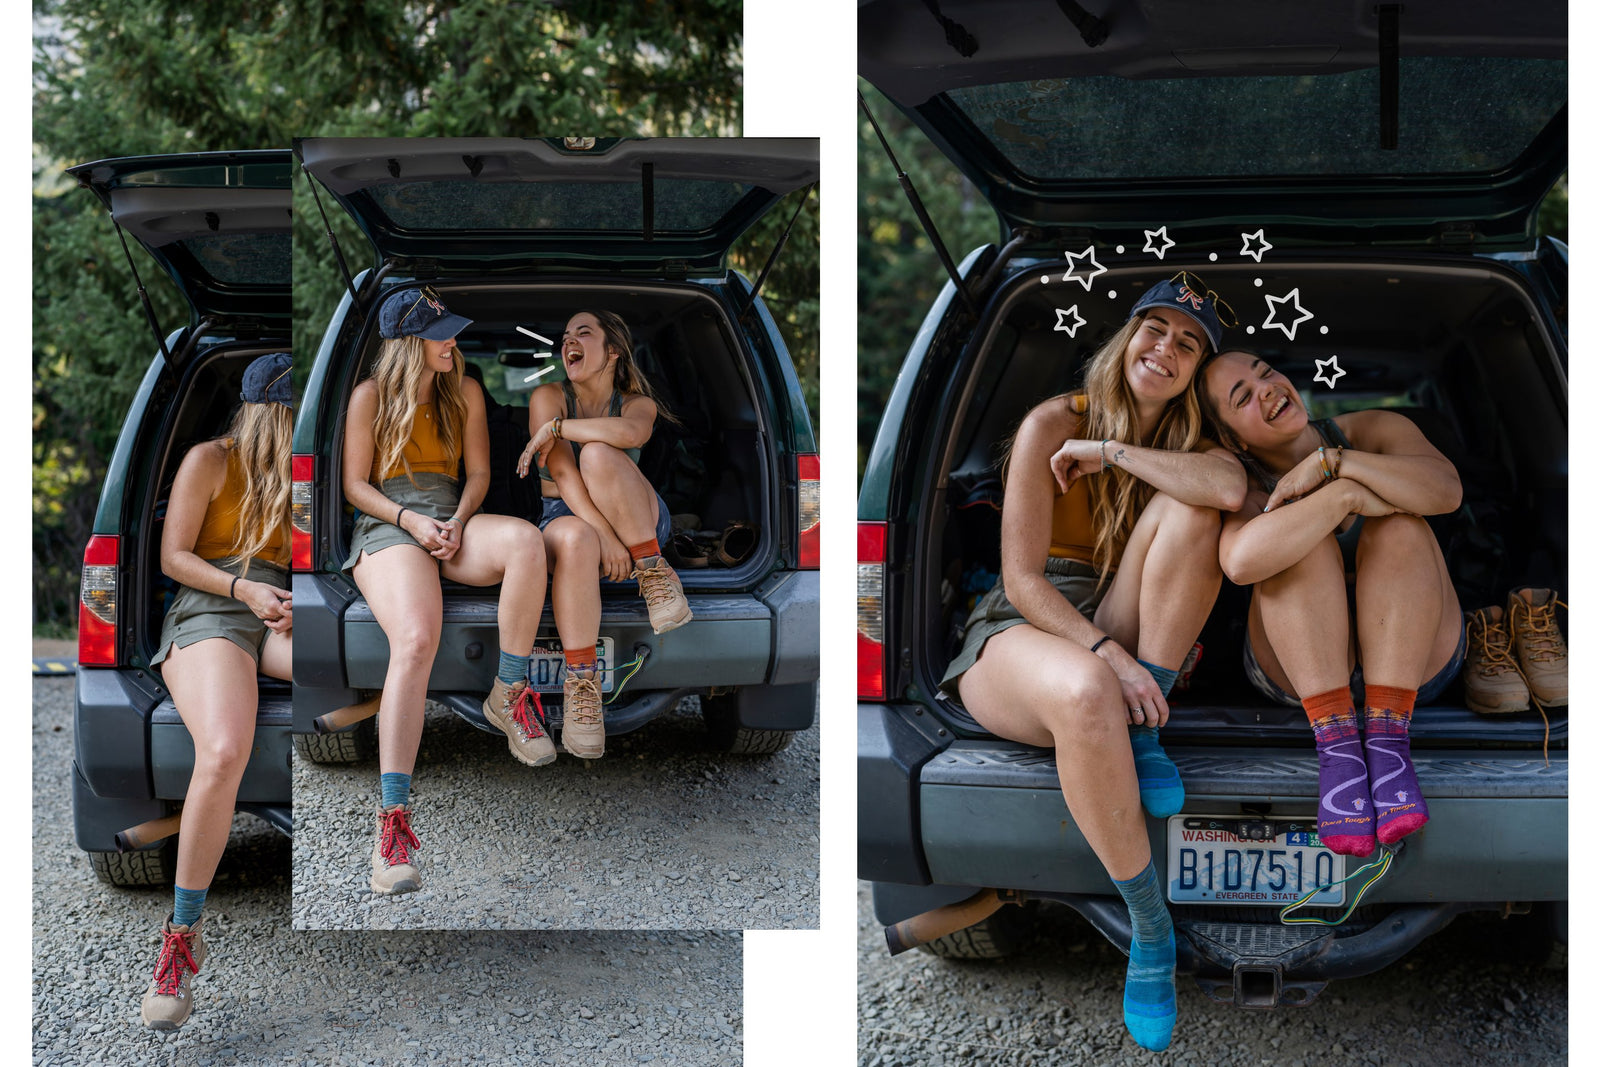 Two hikers seated in car trunk getting ready to go hiking wearing darn tough socks and laughing